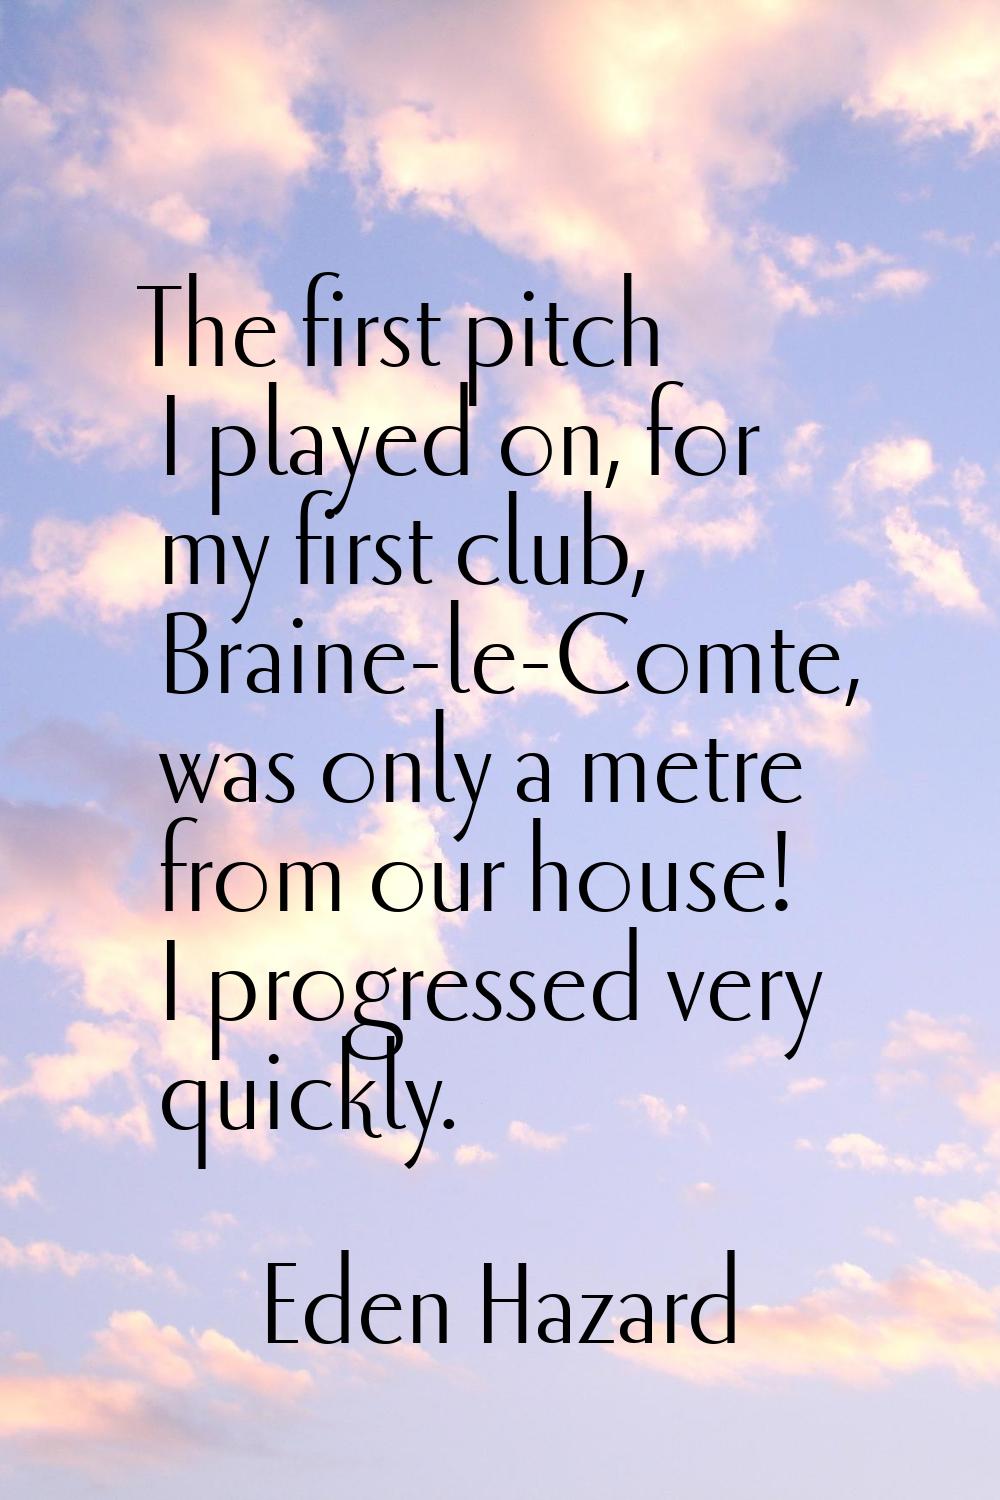 The first pitch I played on, for my first club, Braine-le-Comte, was only a metre from our house! I